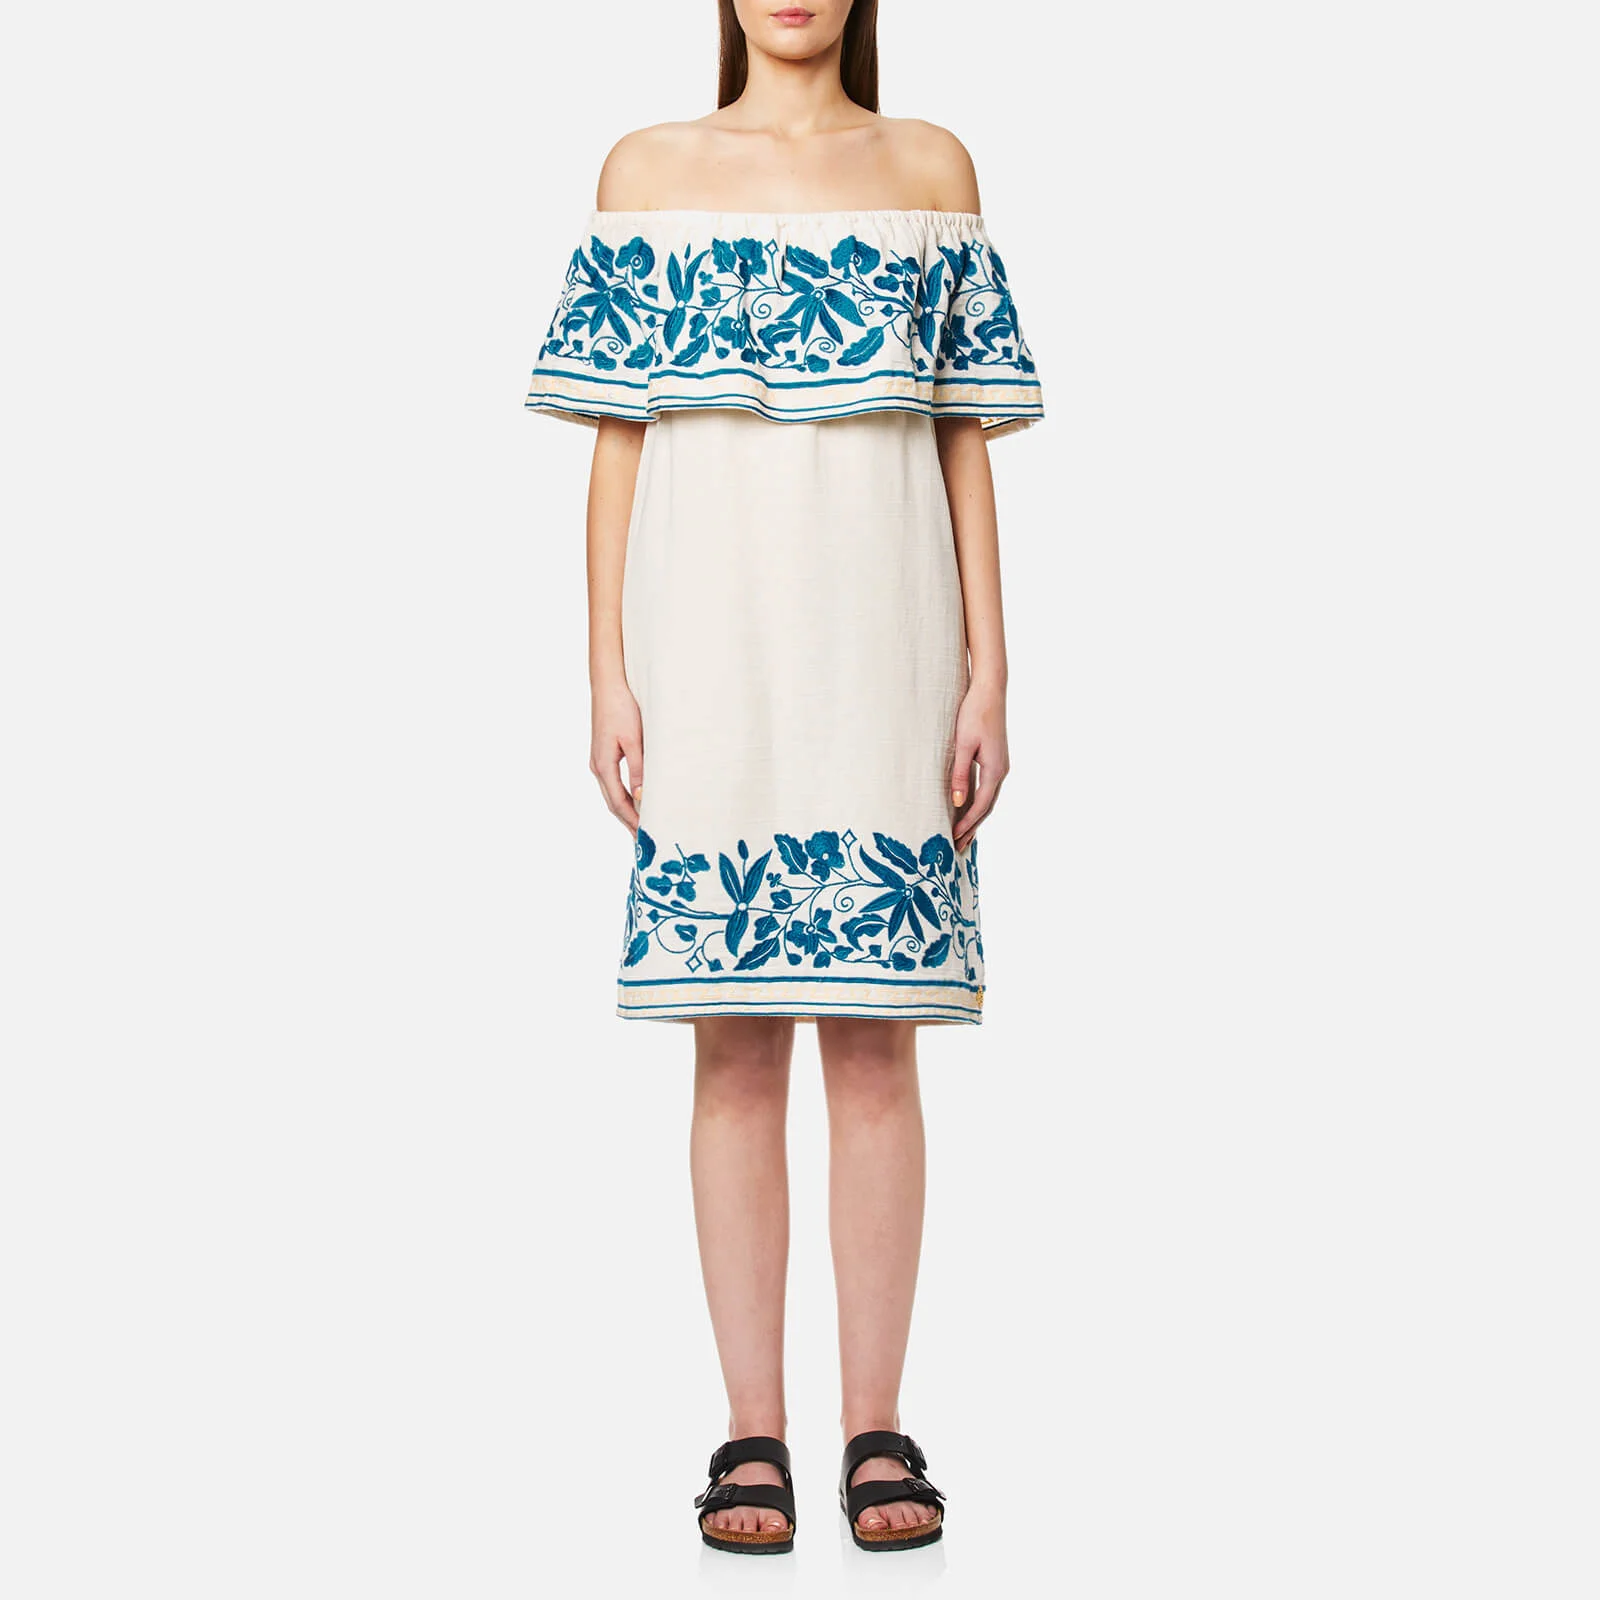 Maison Scotch Women's Boho Off the Shoulder Dress with Embroidery - White Image 1